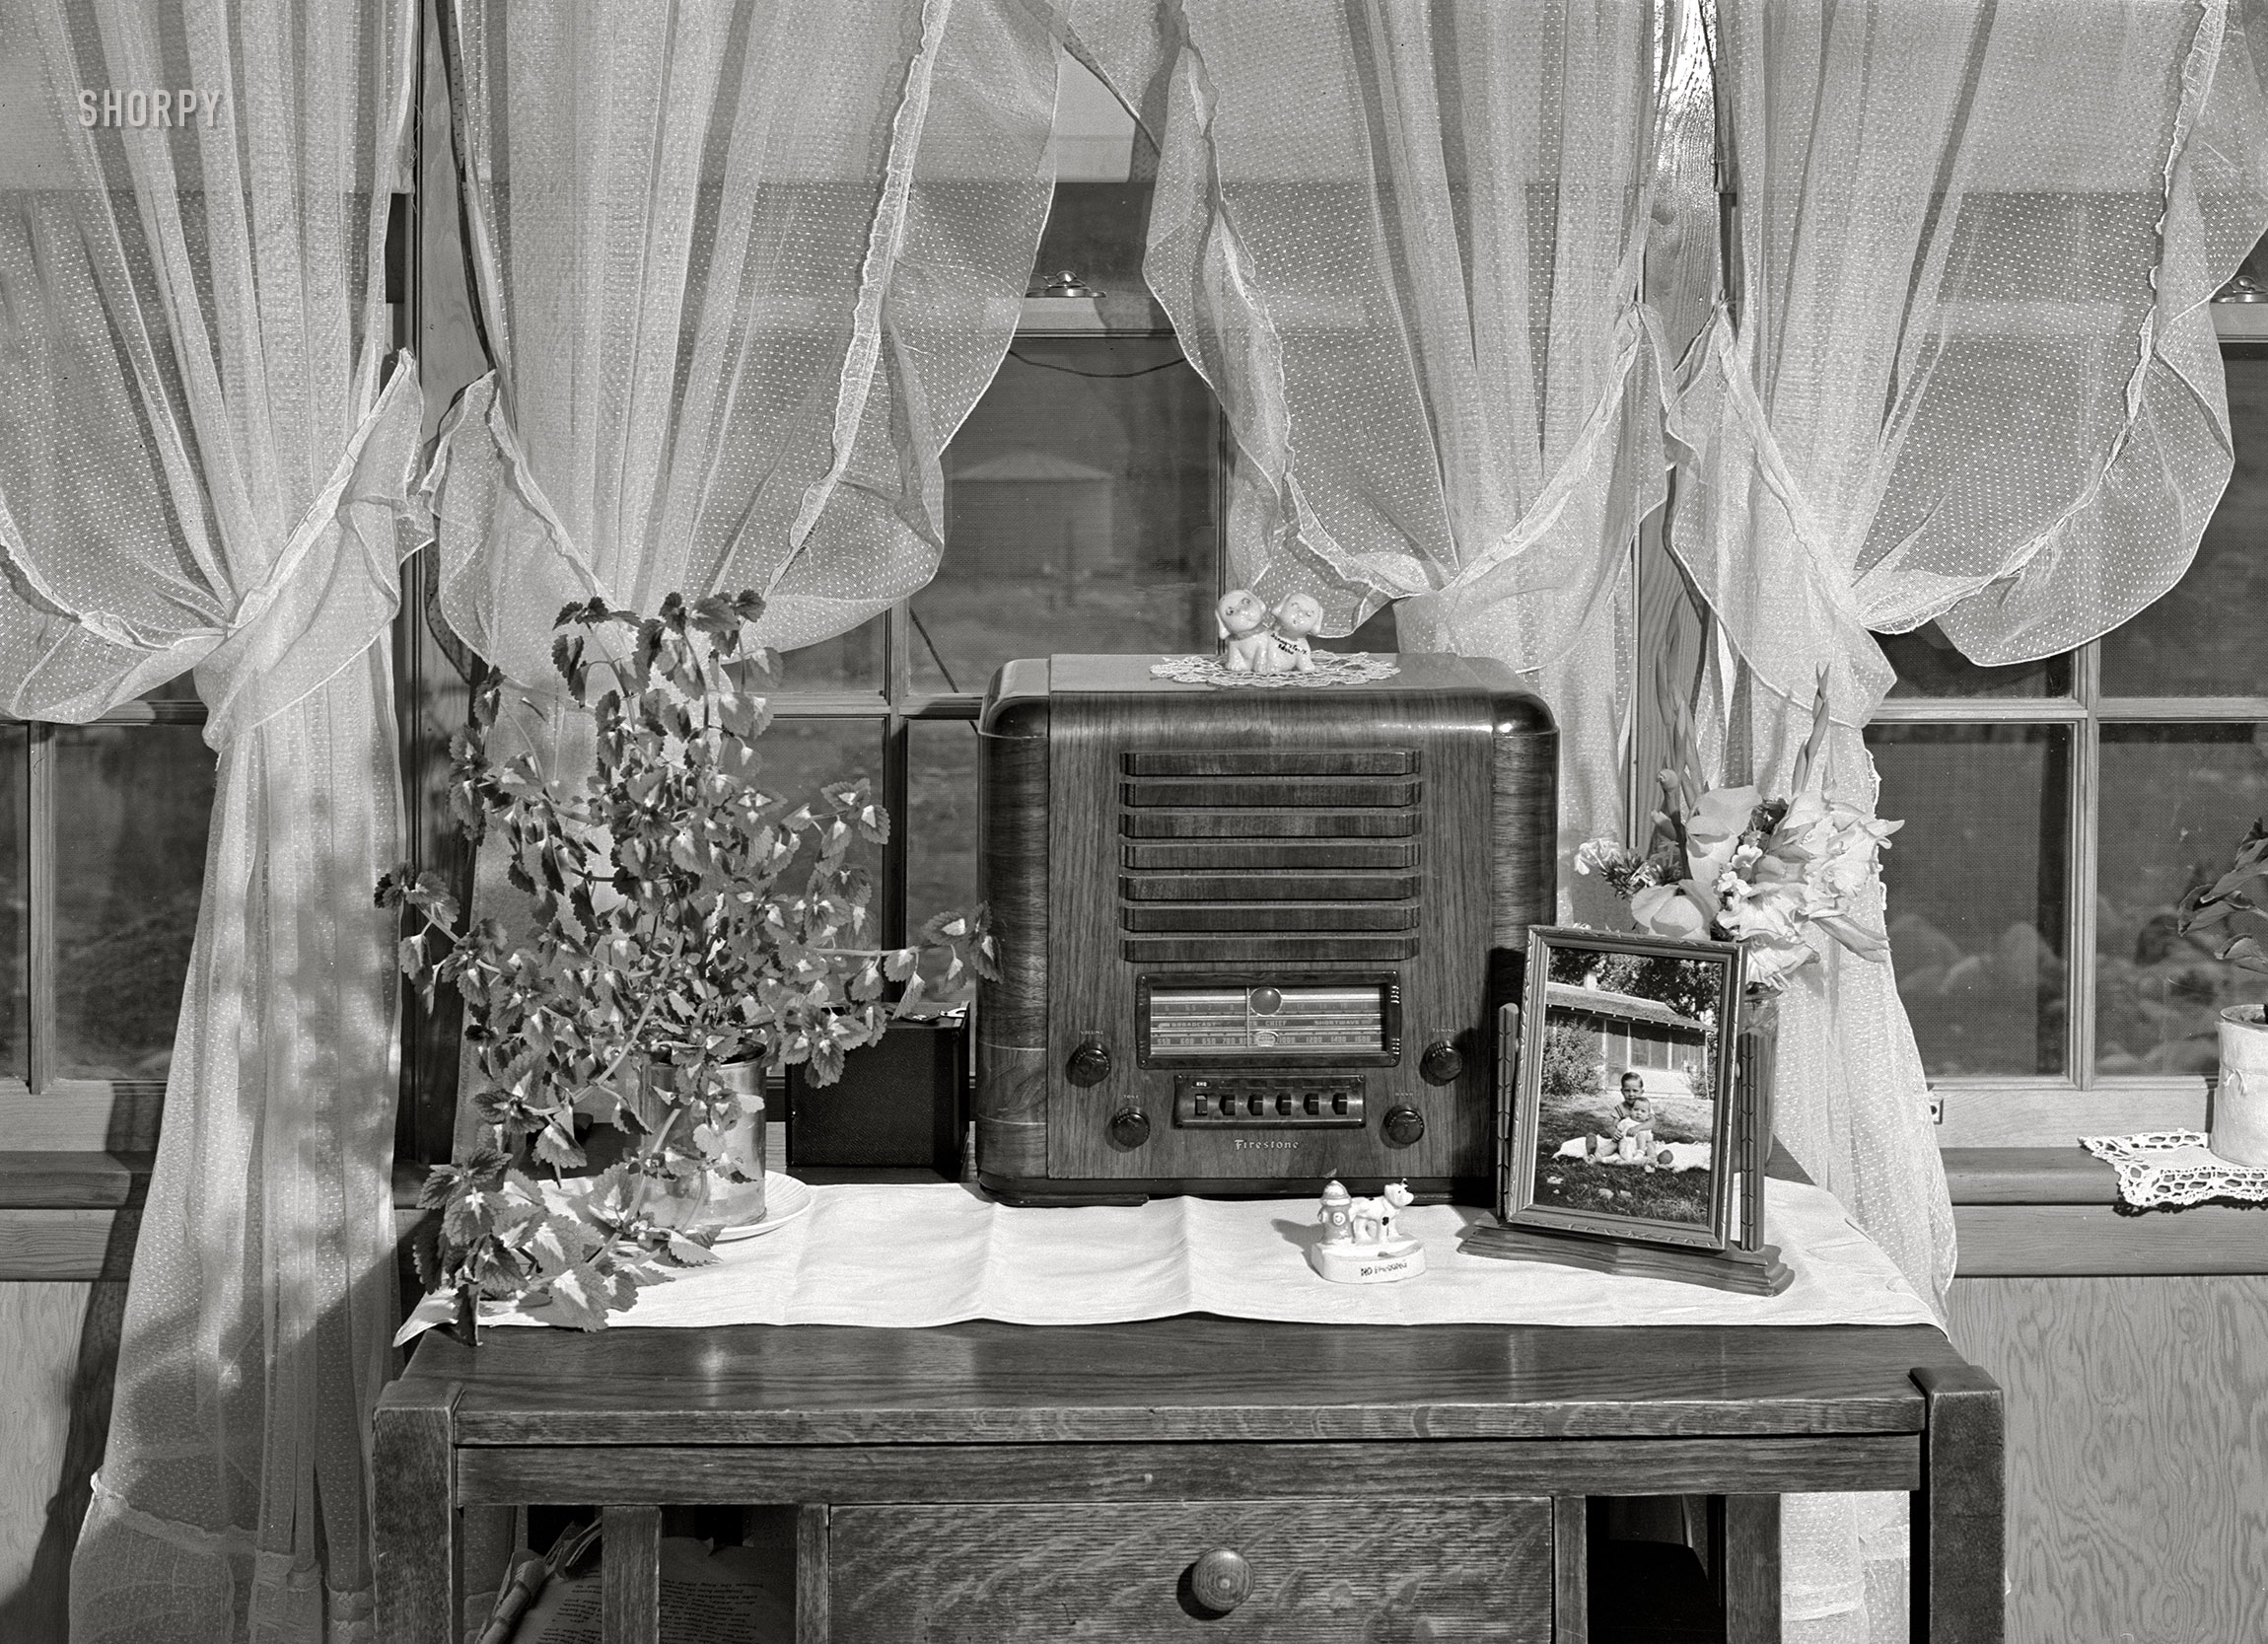 September 1941. "In the living room of farm family, members of Boundary Farms FSA project. Boundary County, Idaho." Photo by Russell Lee, Farm Security Administration. View full size.